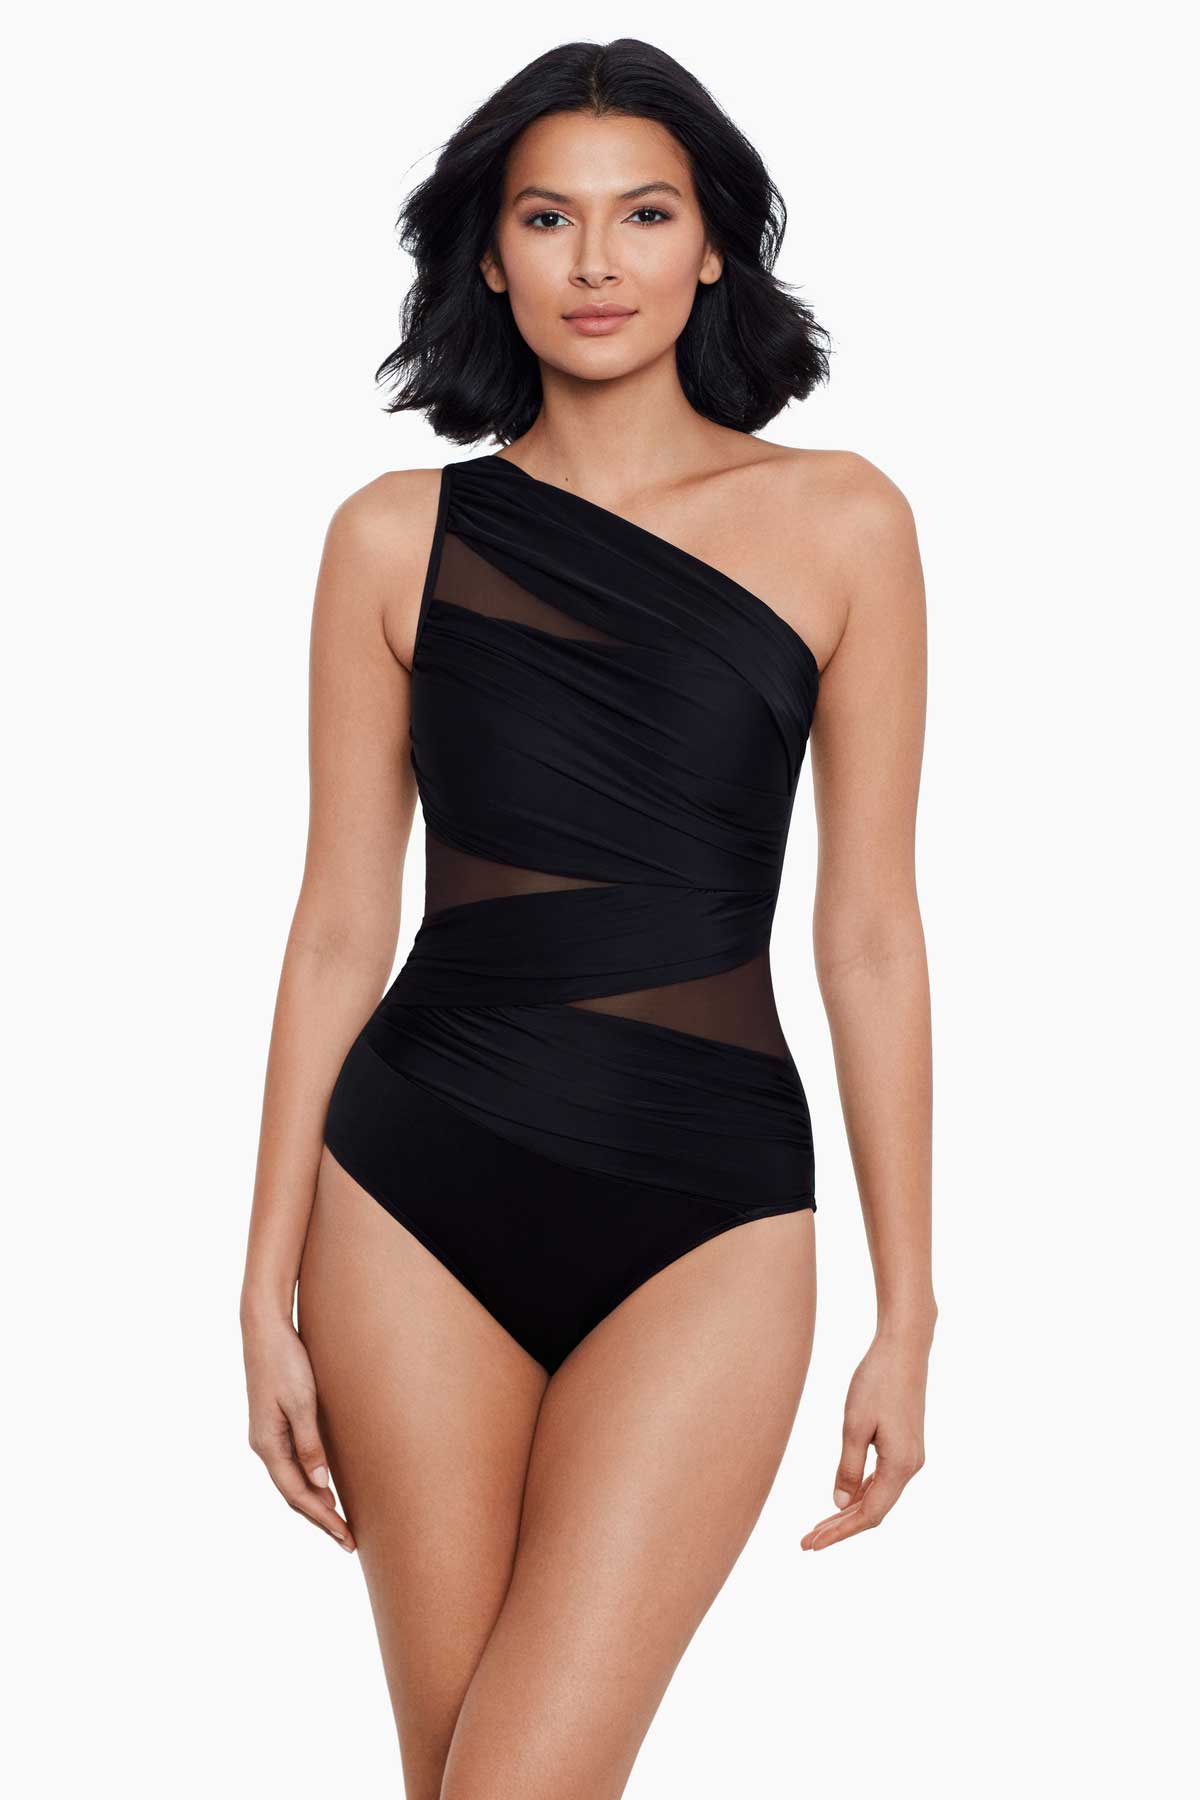 17 Slimming One Piece Swimsuits That Look Extra Flattering in Photos